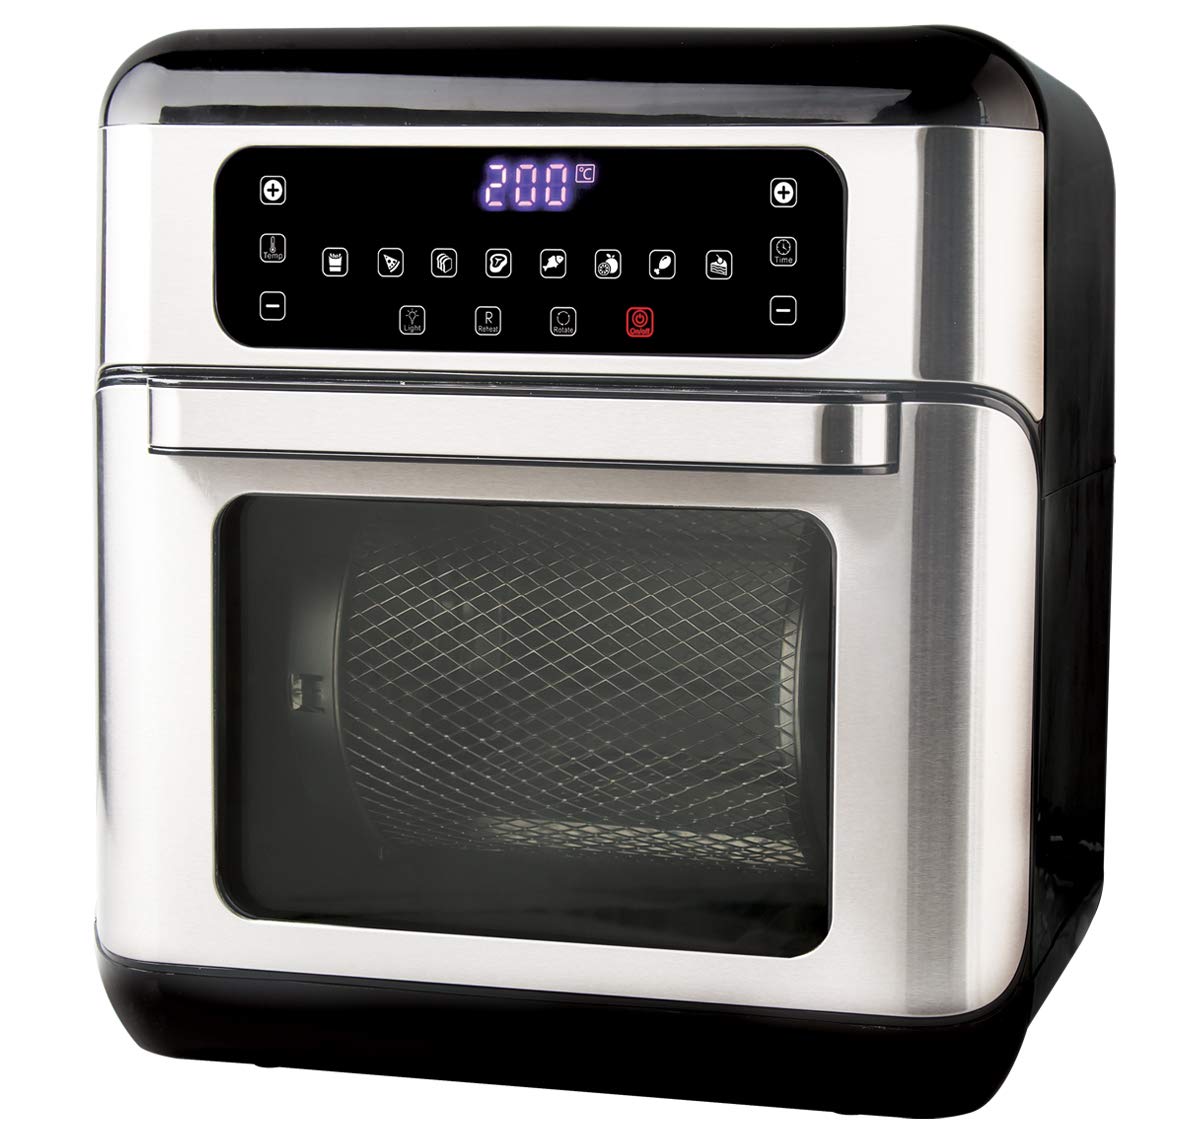 Havells Air Oven Digi with Aero Crisp Technology - Sale is Live